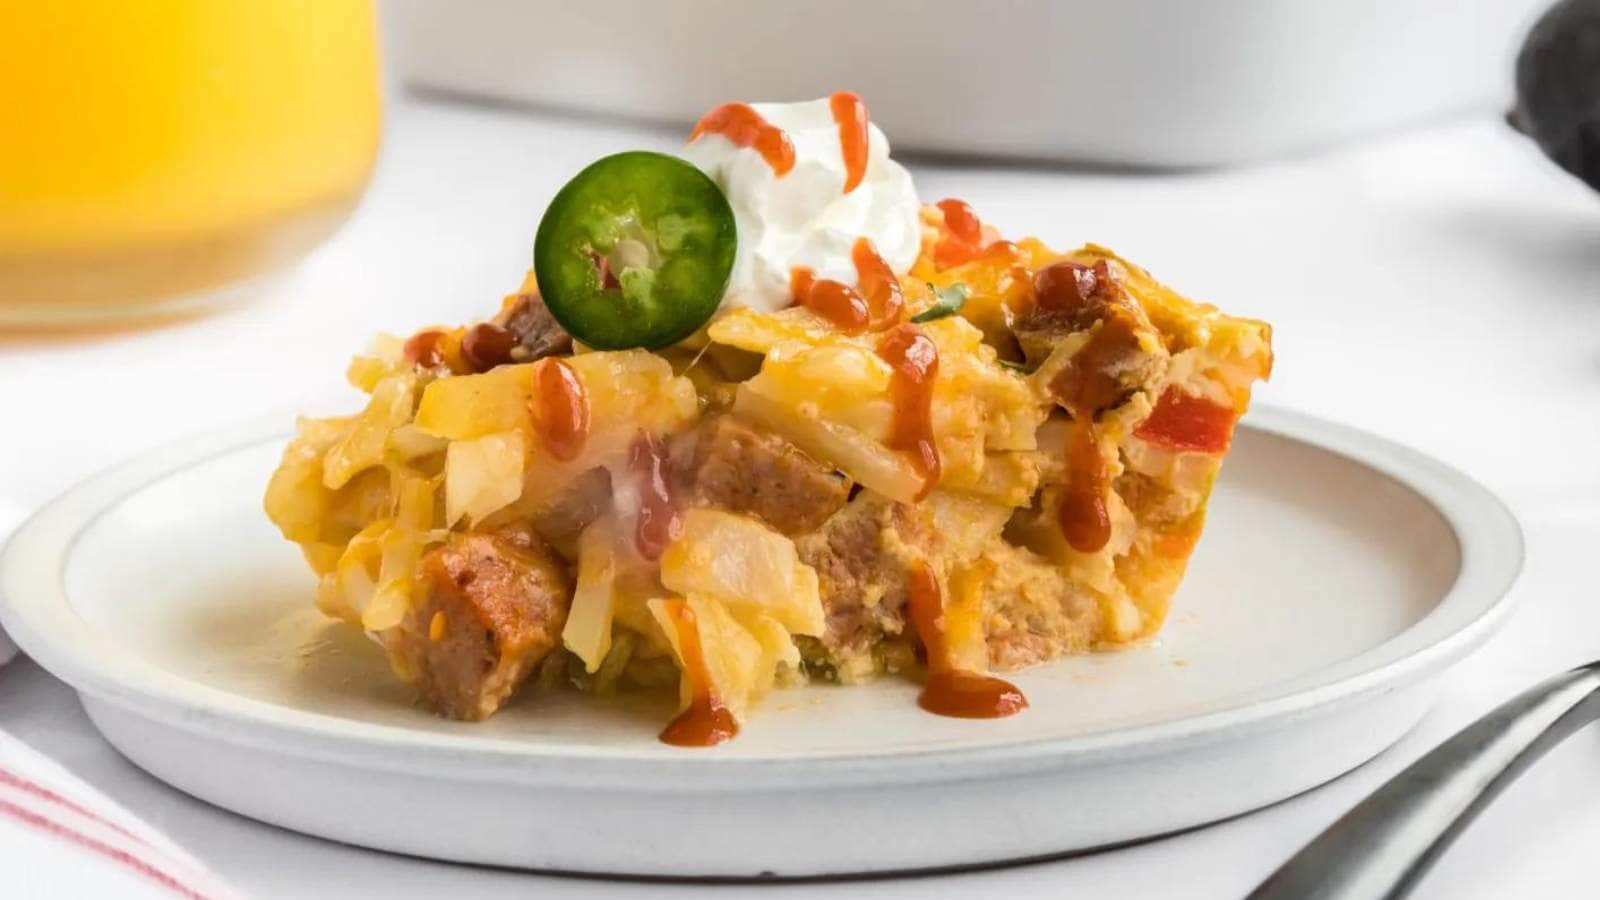 <p>Looking for an easy, filling, and flavorful breakfast to start your day with? Look no further than this Southwest Breakfast Casserole. Make it ahead of time or whip it together first thing in the morning- either way, it’s going to be delicious!</p><p><strong>Get the Recipe: <a href="https://cinnamonandsageco.com/southwest-breakfast-casserole/" rel="noreferrer noopener">Southwest Breakfast Casserole</a></strong></p><p><strong>More Delicious Comfort Food Recipes Perfect For Fall</strong></p><ul> <li><a href="https://cheerfulcook.com/honey-roasted-sweet-potatoes/">Honey Roasted Sweet Potatoes</a></li> <li><a href="https://cheerfulcook.com/spaetzle/">German Spaetzle</a></li> </ul>